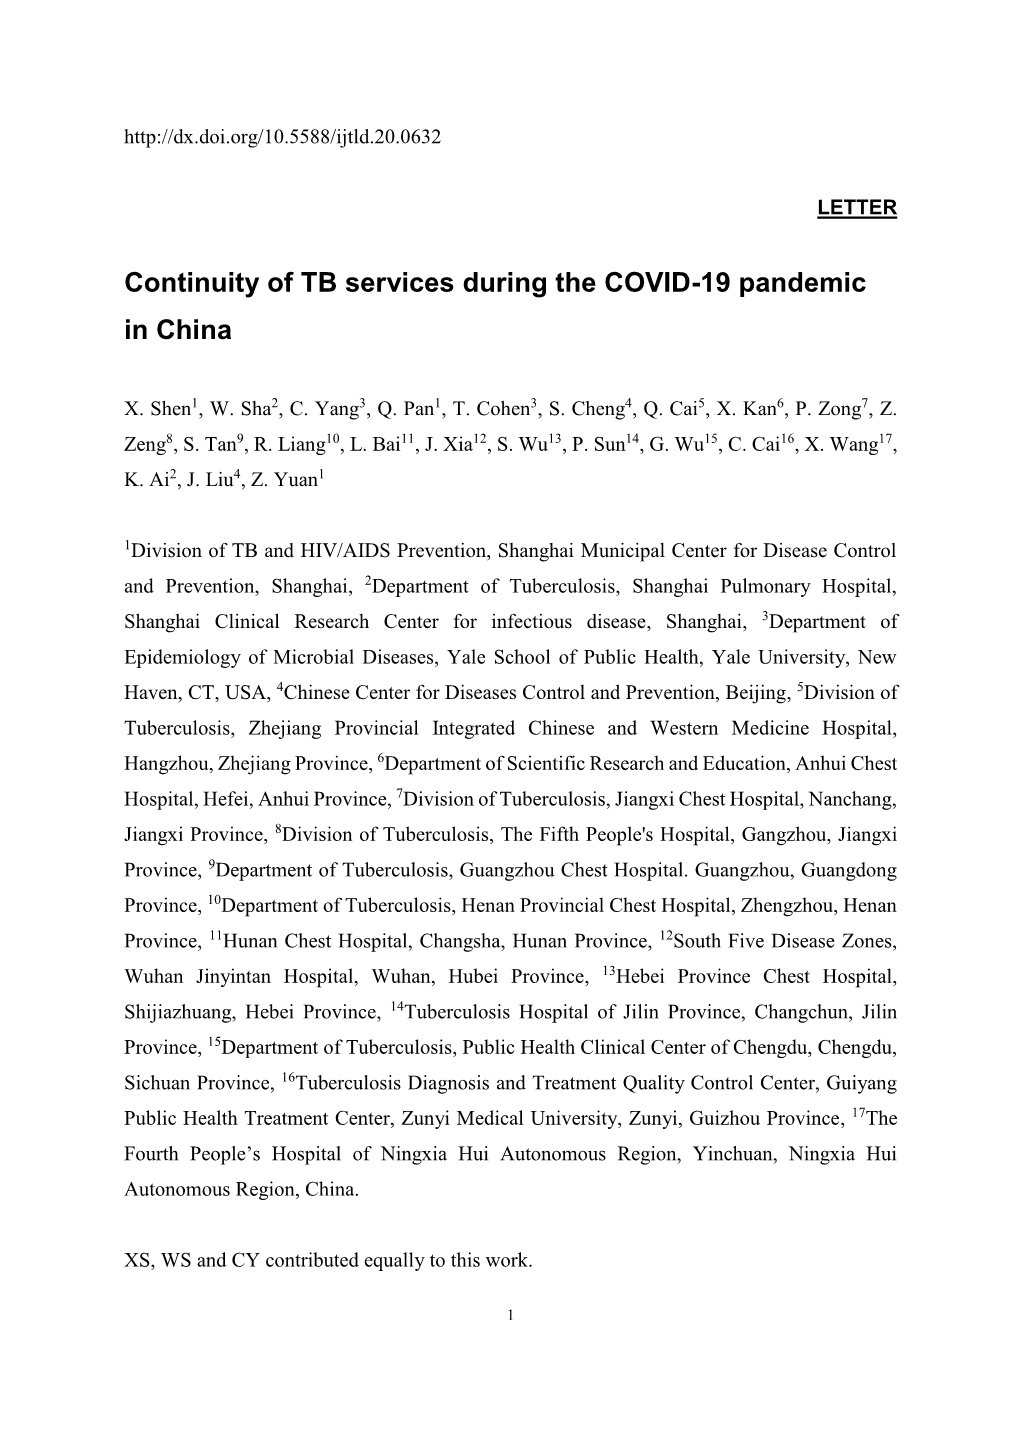 Continuity of TB Services During the COVID-19 Pandemic in China